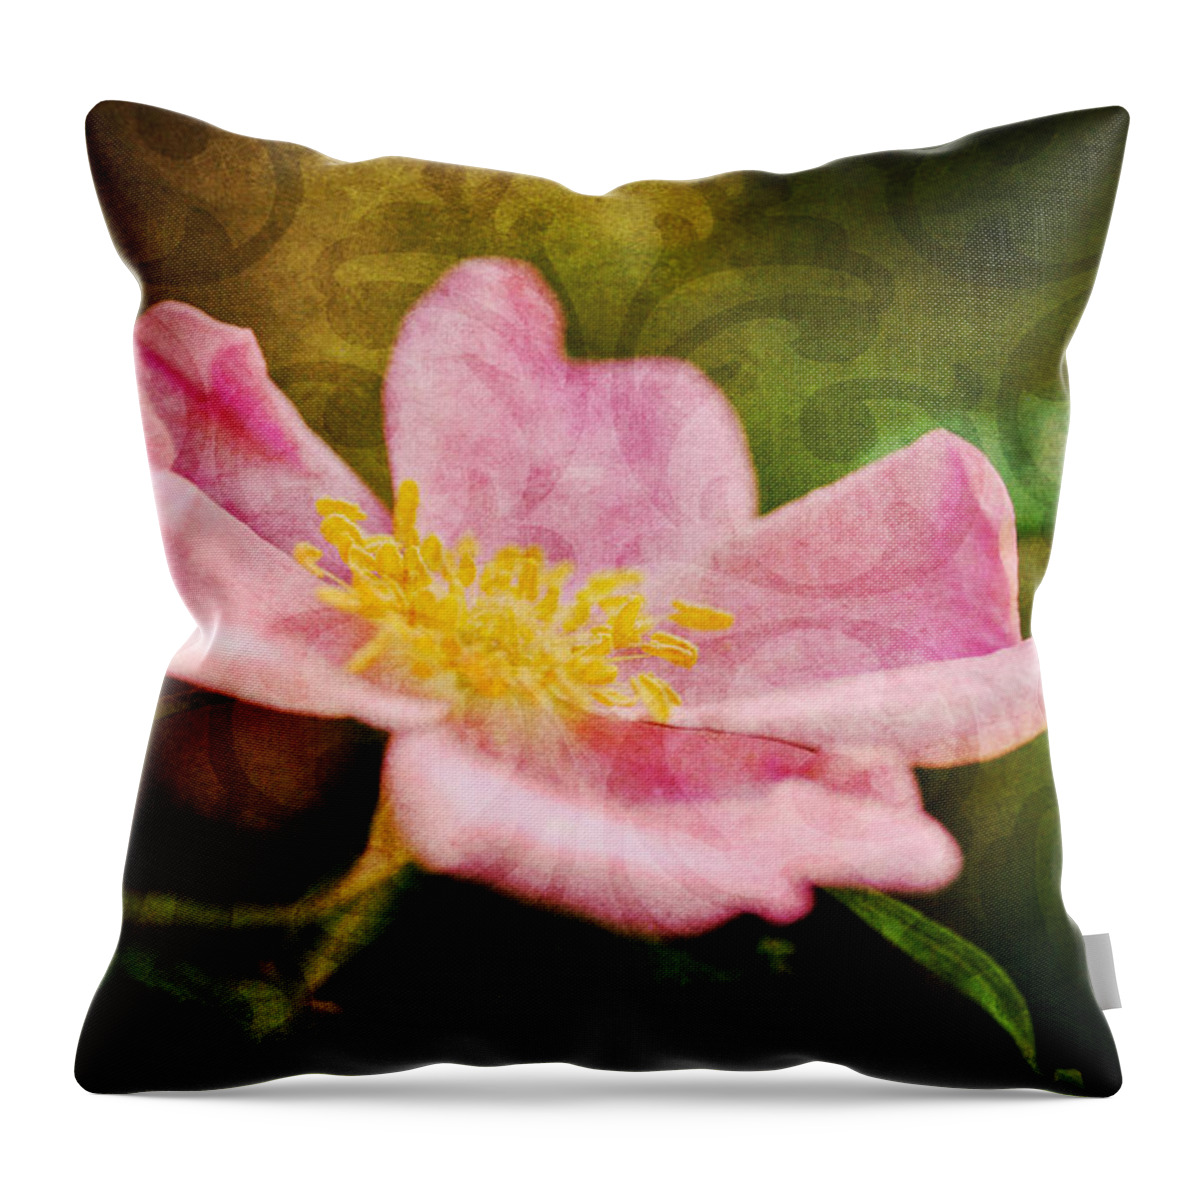 Rose Throw Pillow featuring the photograph Morning Rose by Kelly Nowak